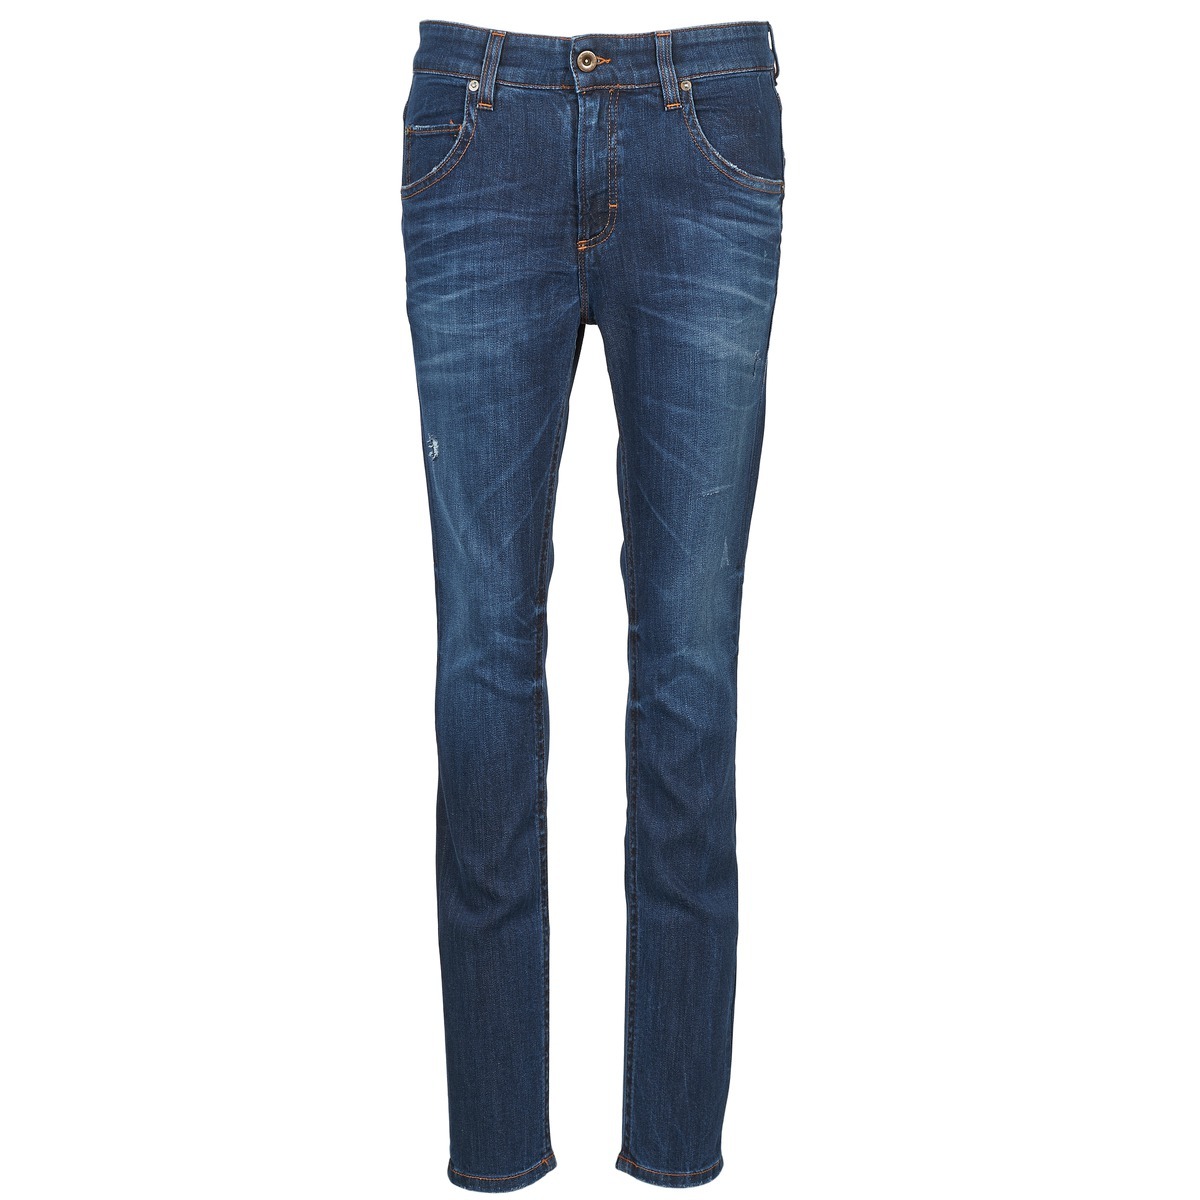 Spartoo - Women's Blue Skinny Jeans from Marc O'Polo GOOFASH